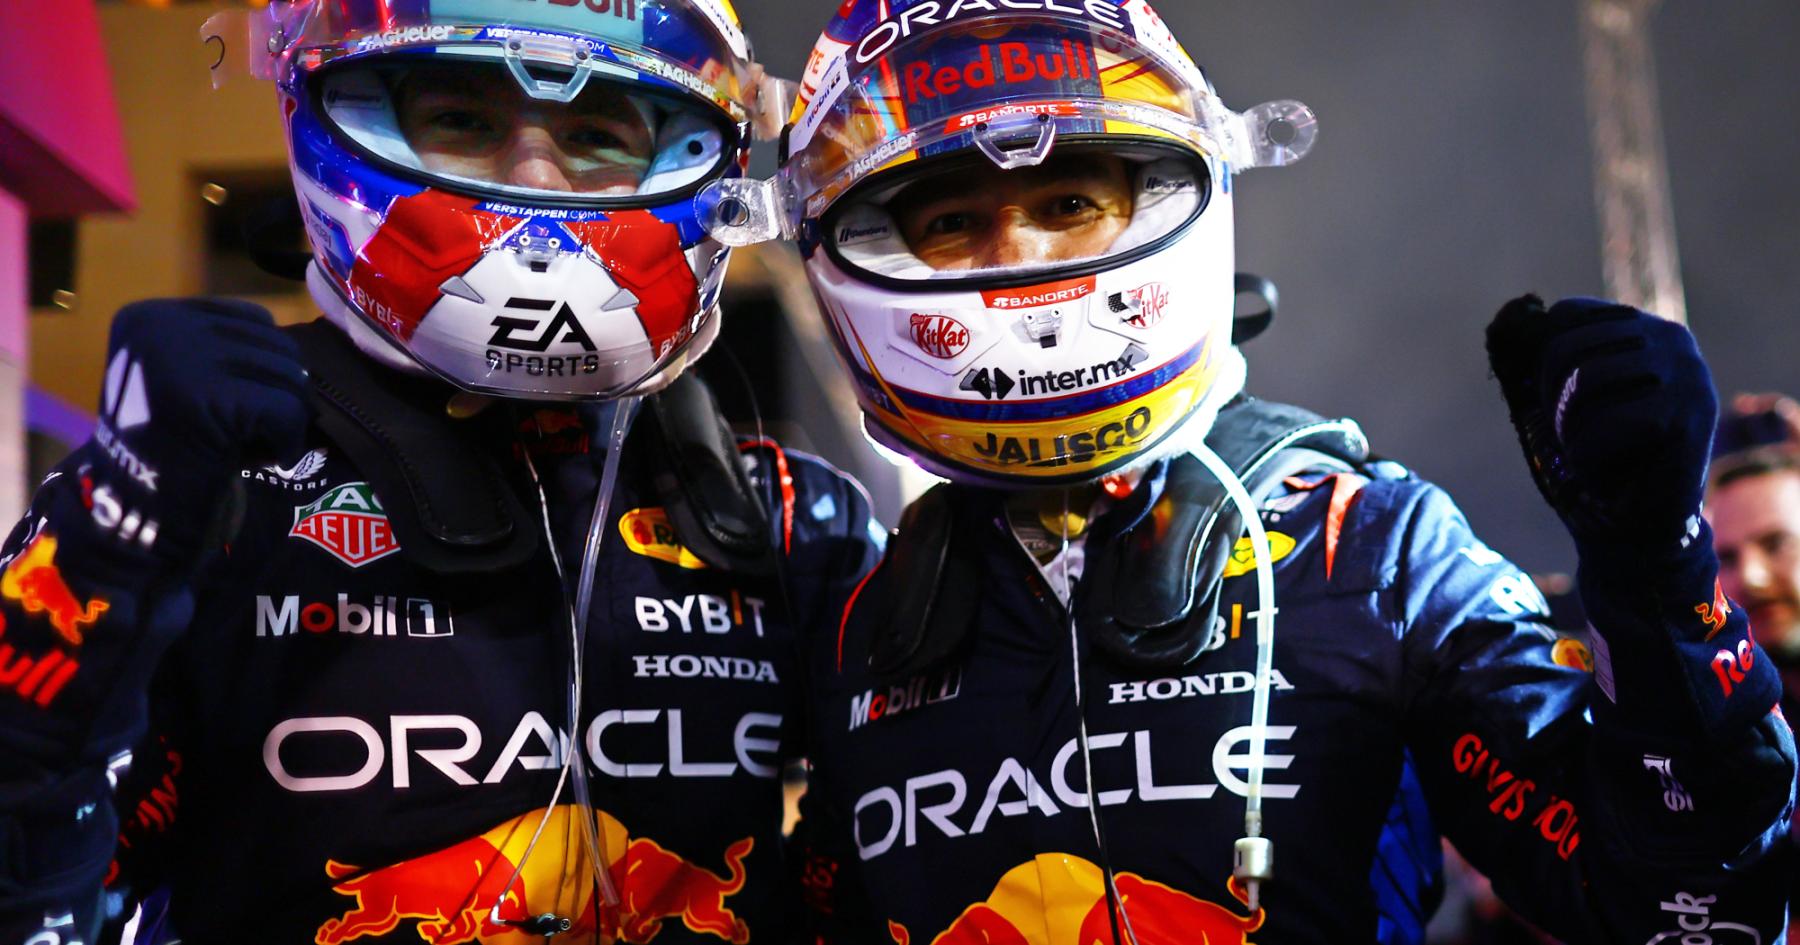 The Untapped Potential: Seeking Max Verstappen's Strategic Partner for the Future